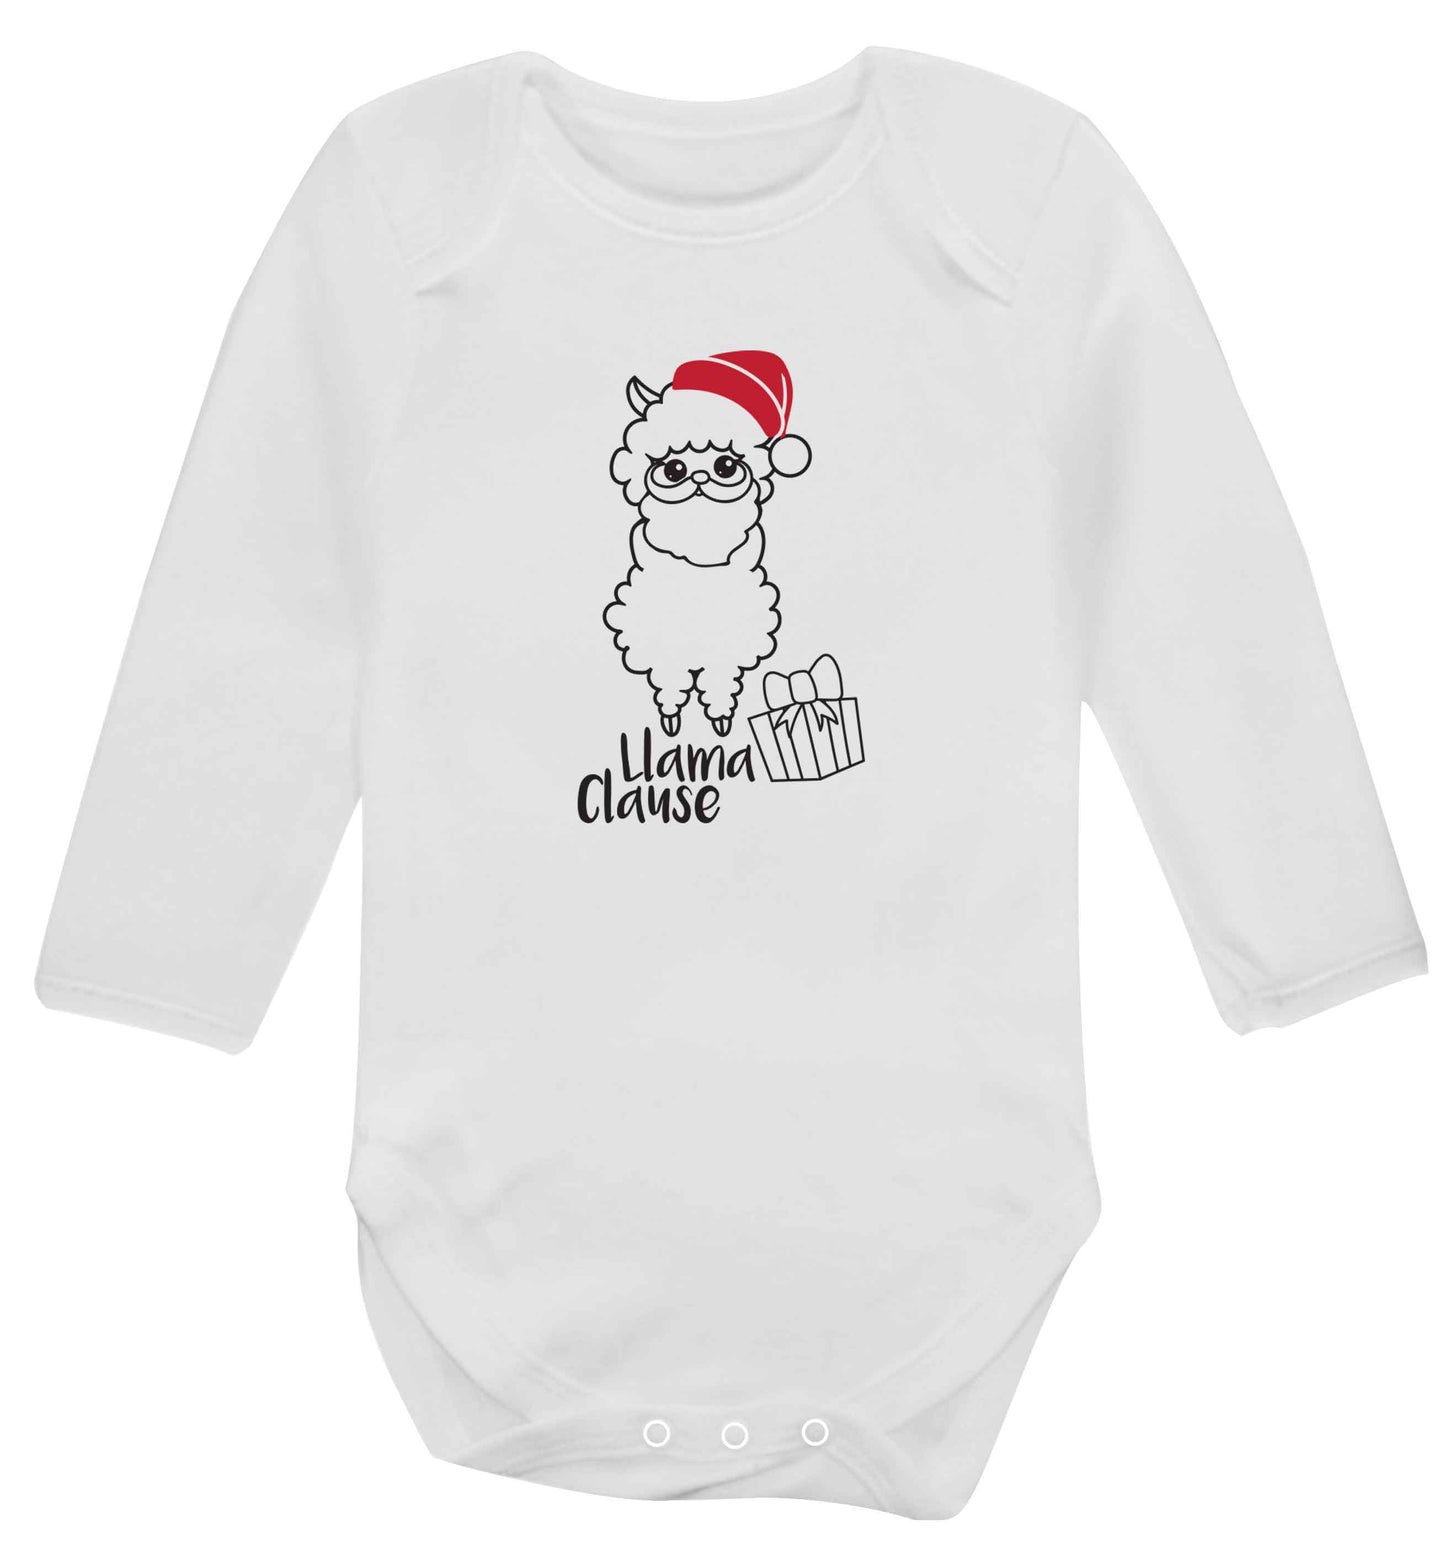 Llama Clause baby vest long sleeved white 6-12 months